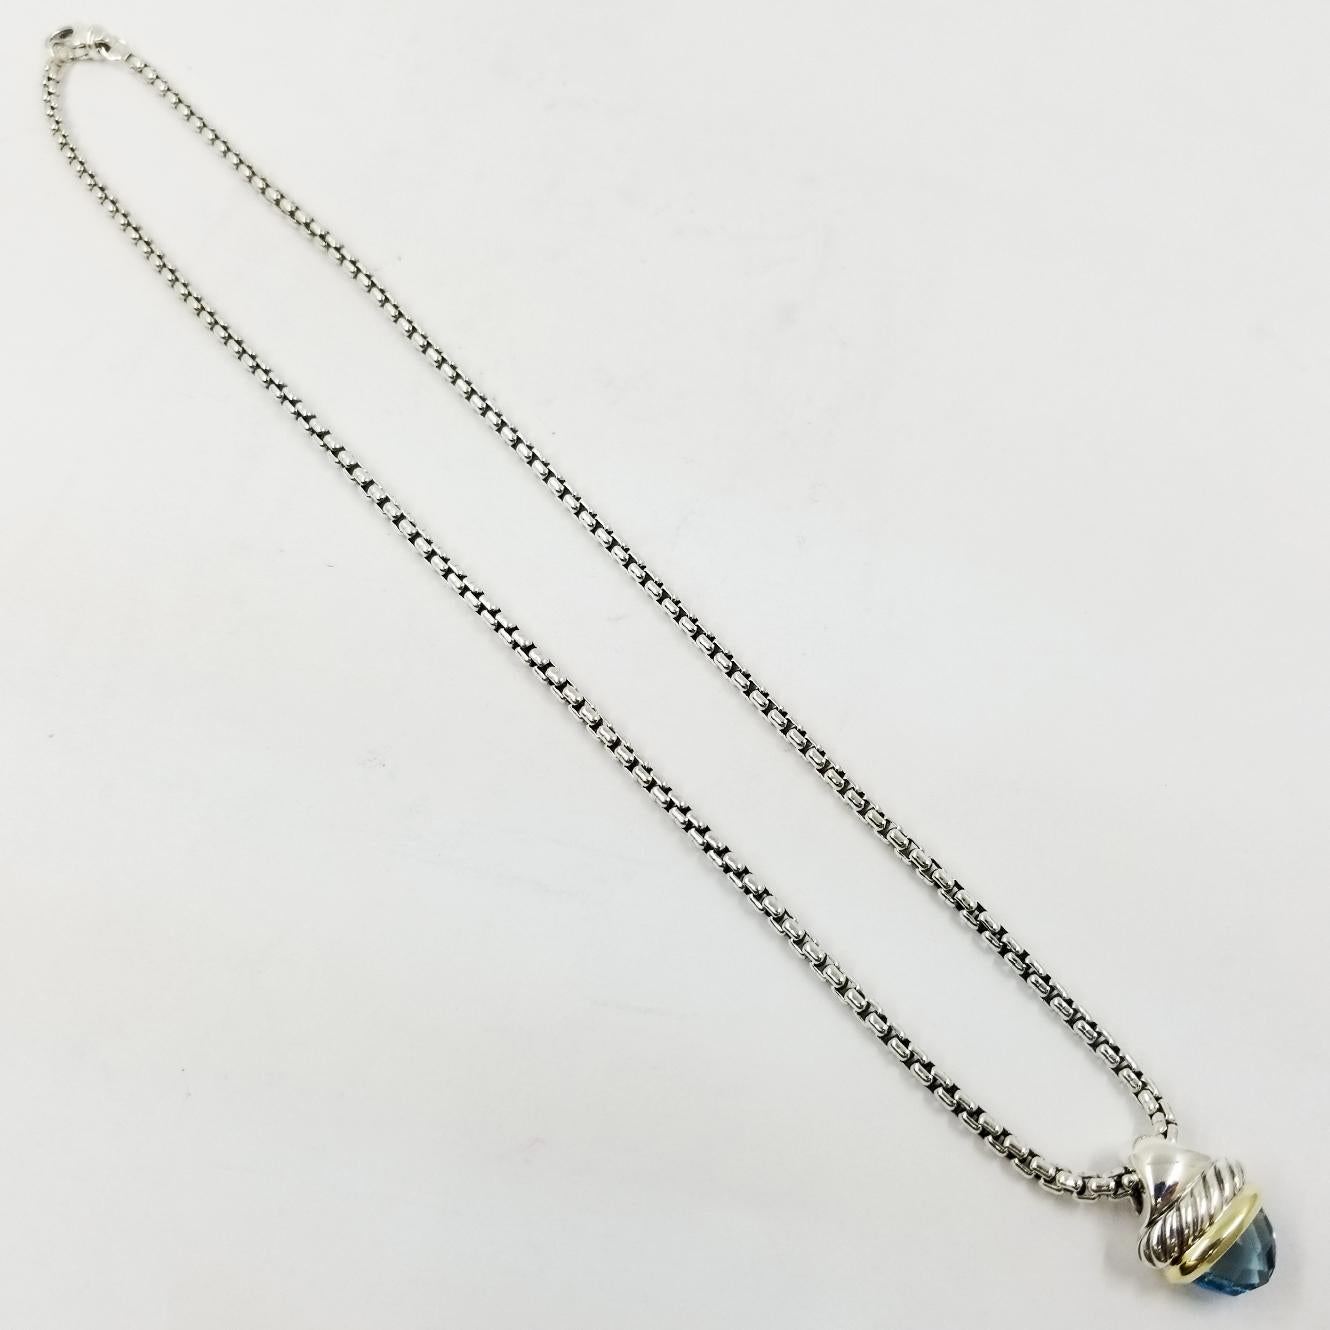 David Yurman Sterling Silver & 14 Karat Yellow Gold Necklace Featuring Blue Topaz Pendant. 16 Inches Long. Original MSRP $495. Professionally Cleaned and Polished to Remove Tarnish and Scratches. Comes with Yurman Travel Pouch.